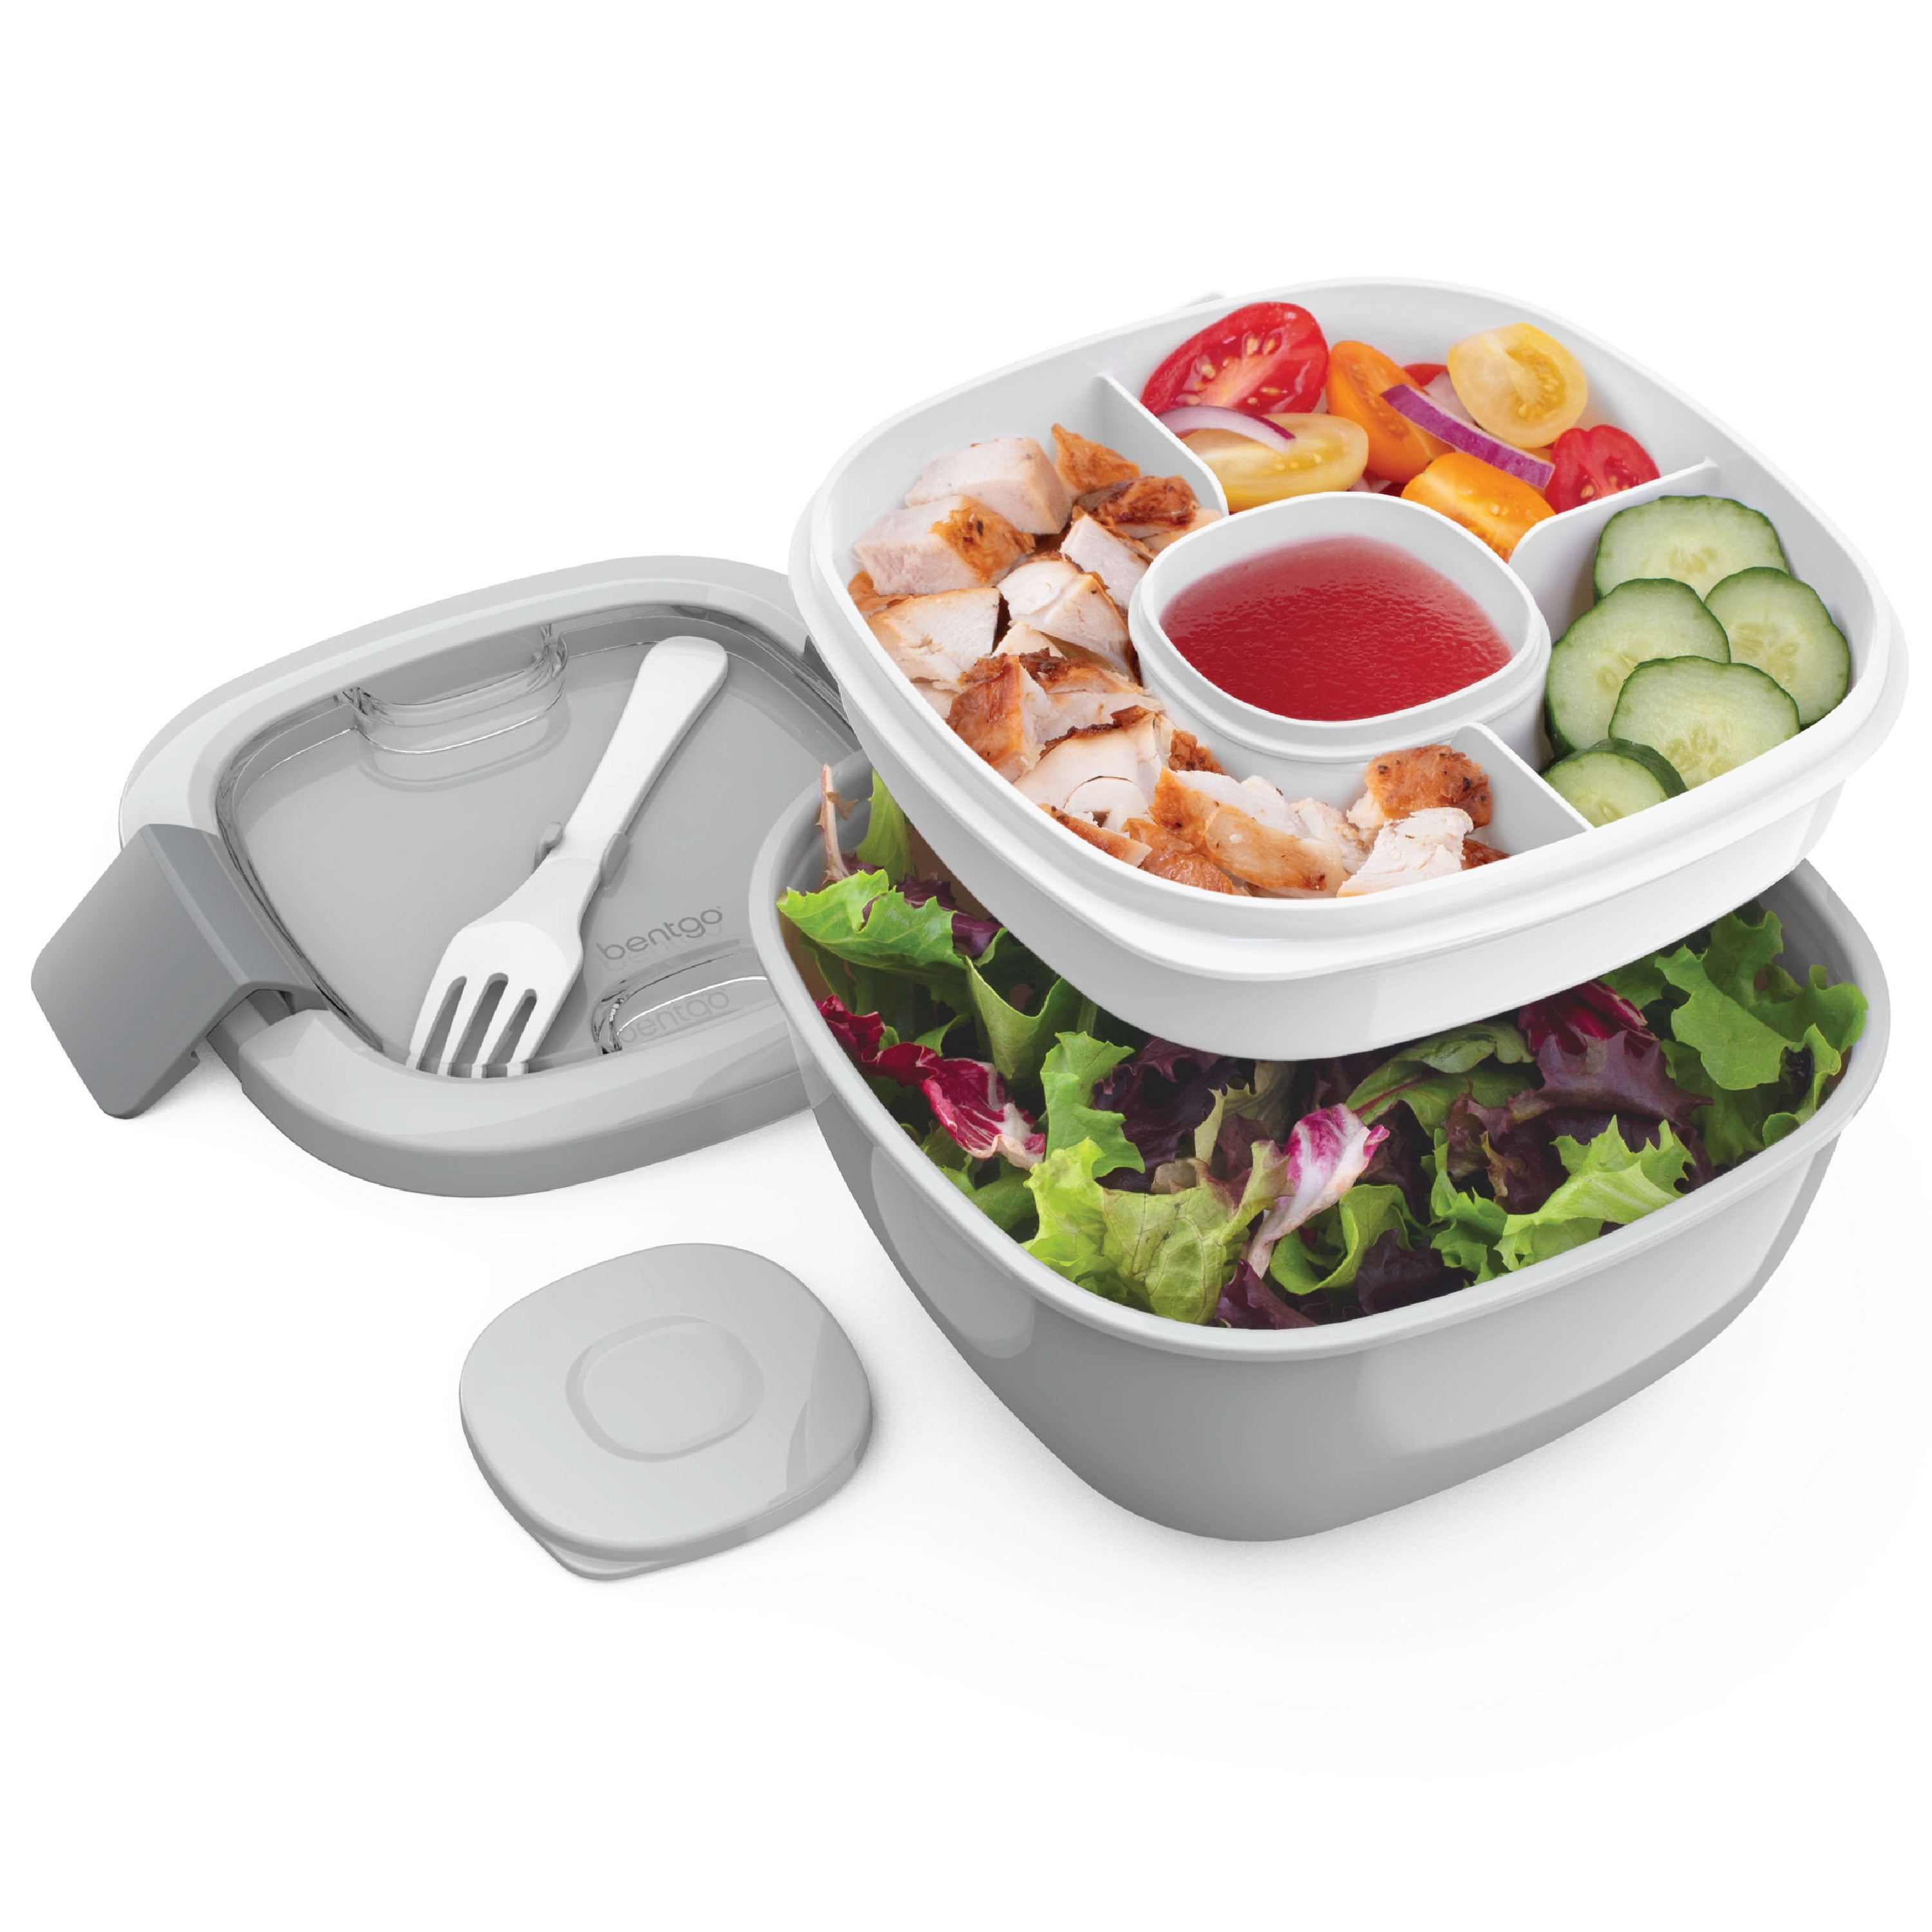 LocknLock on The Go Meals Salad Bowl with Tray, 54-ounce